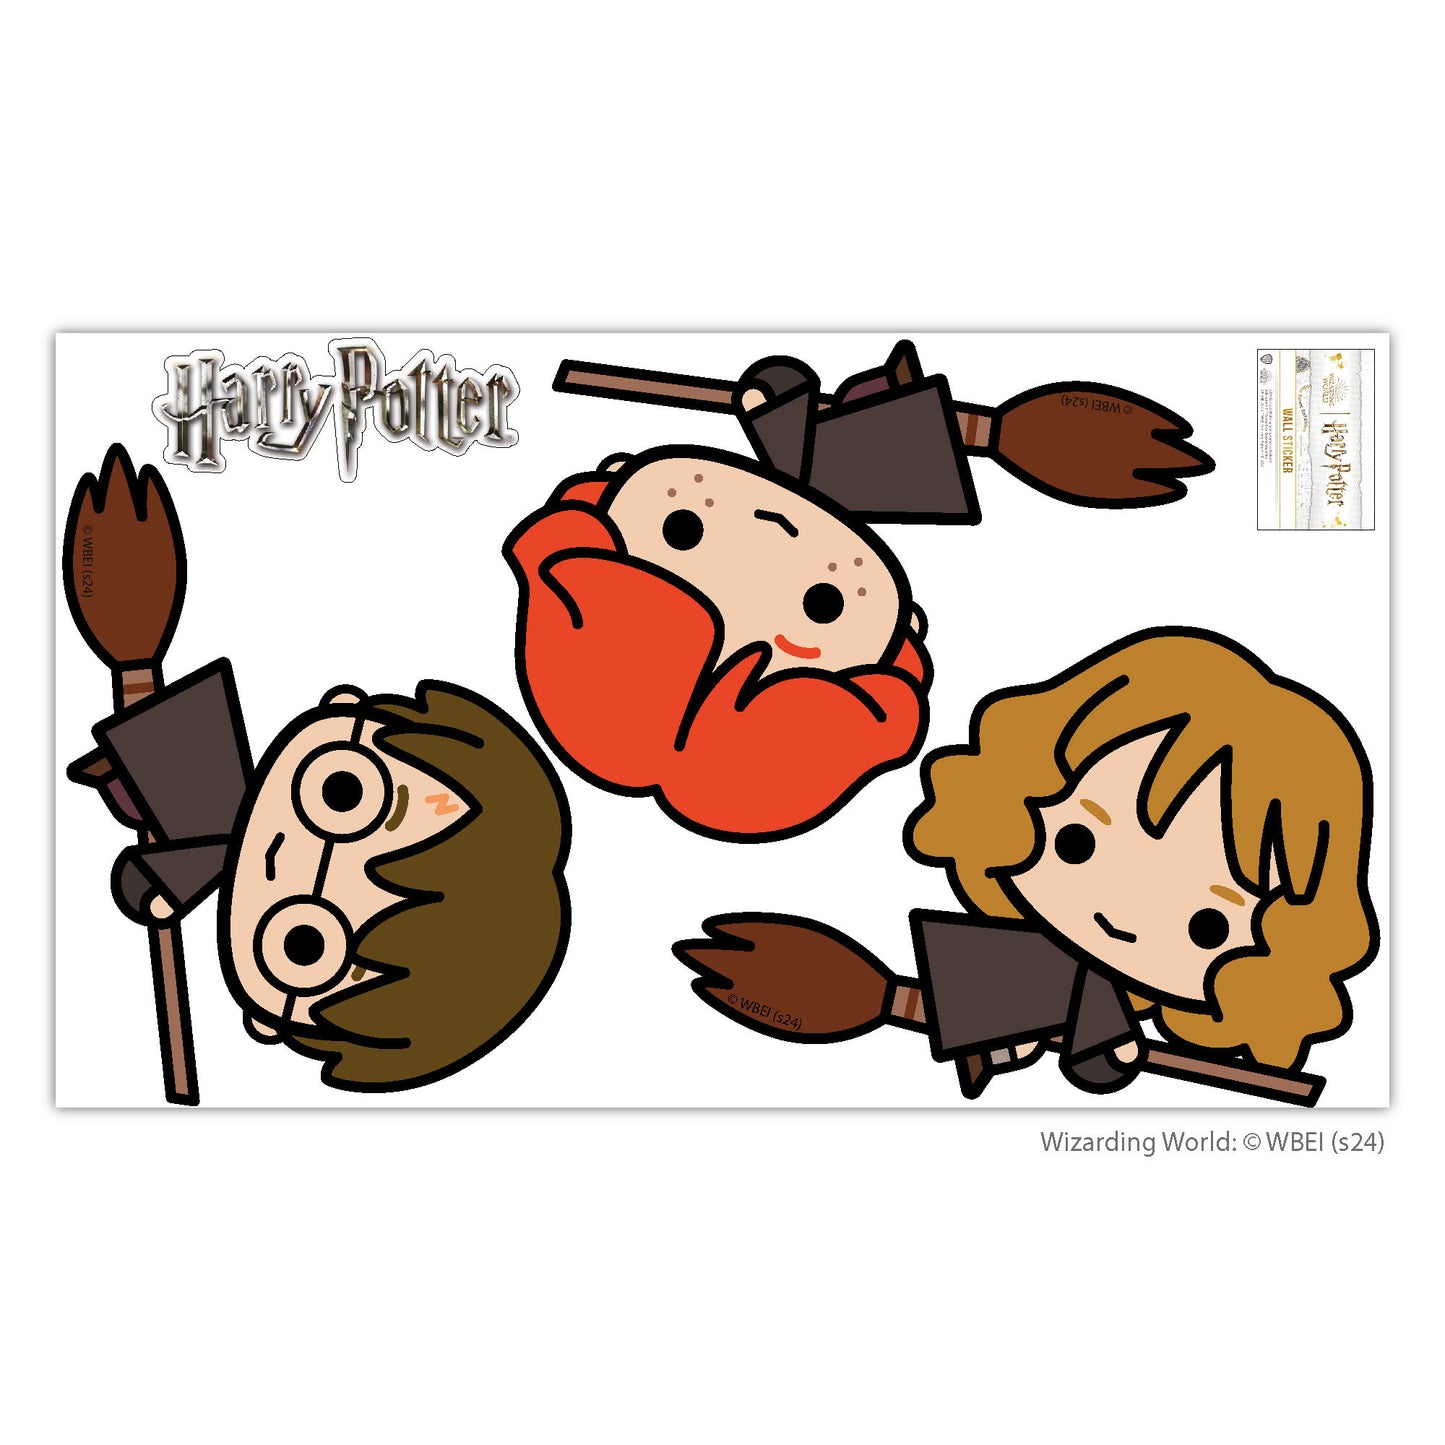 HARRY POTTER Wall Sticker – Character Trio Brooms Charm Wall Decal Set Wizarding World Art